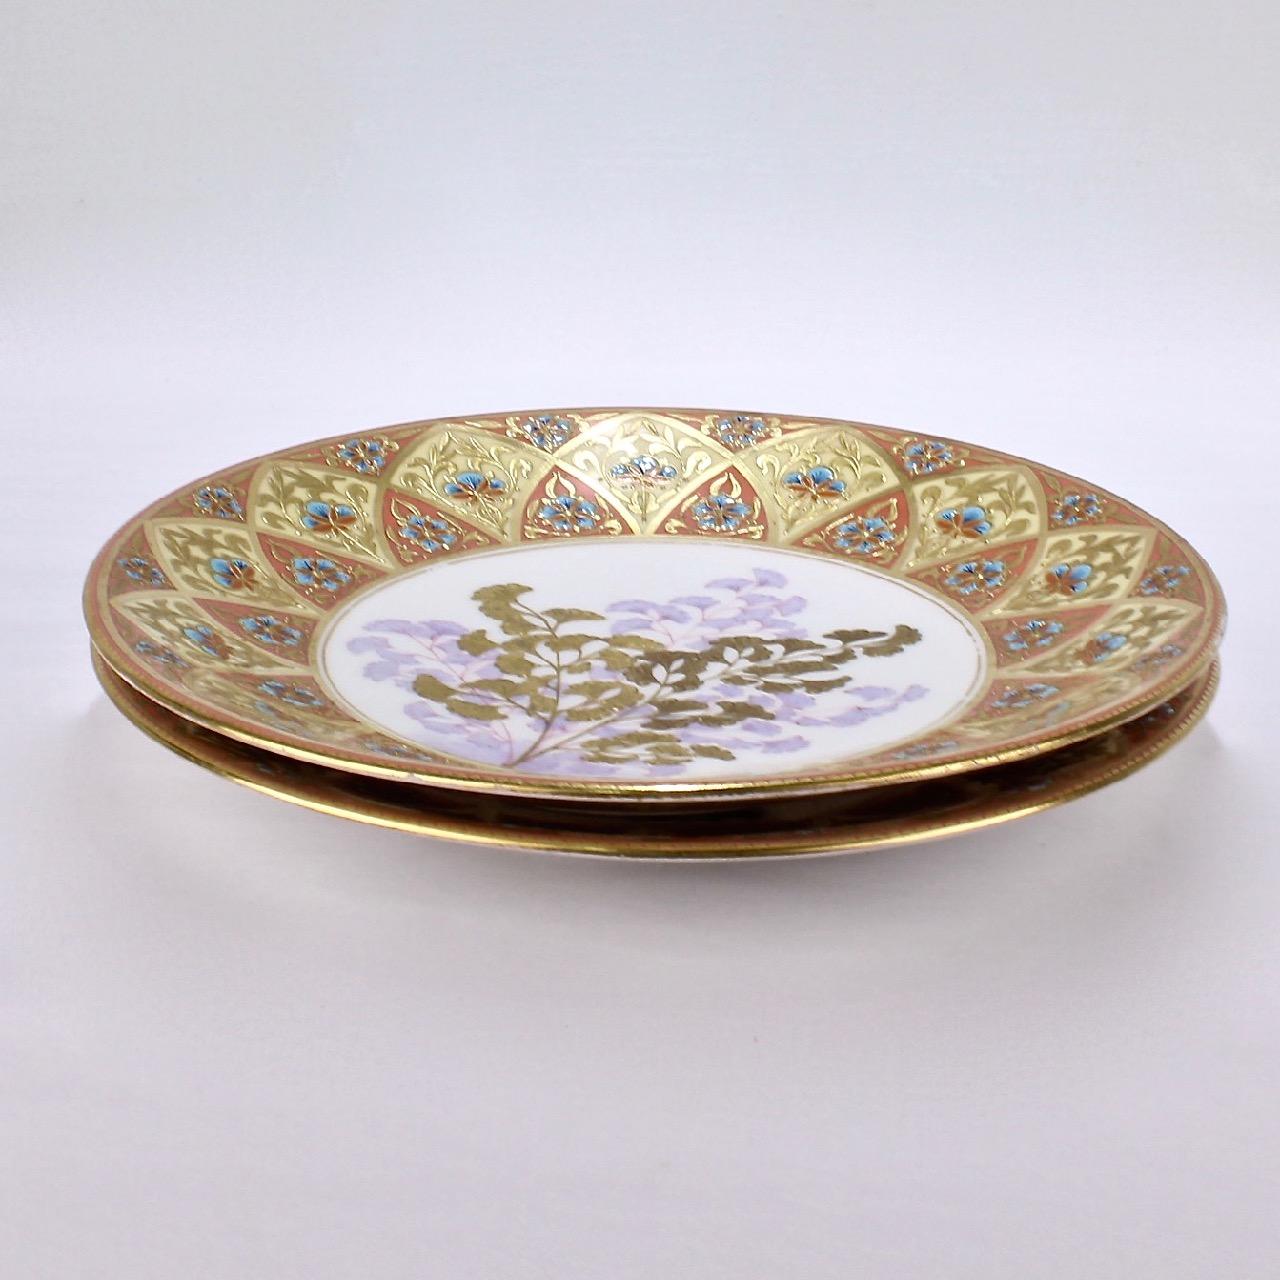 Derby Porcelain Aesthetic Period Gilt and Enameled Botanical Cabinet Plate Pair For Sale 8